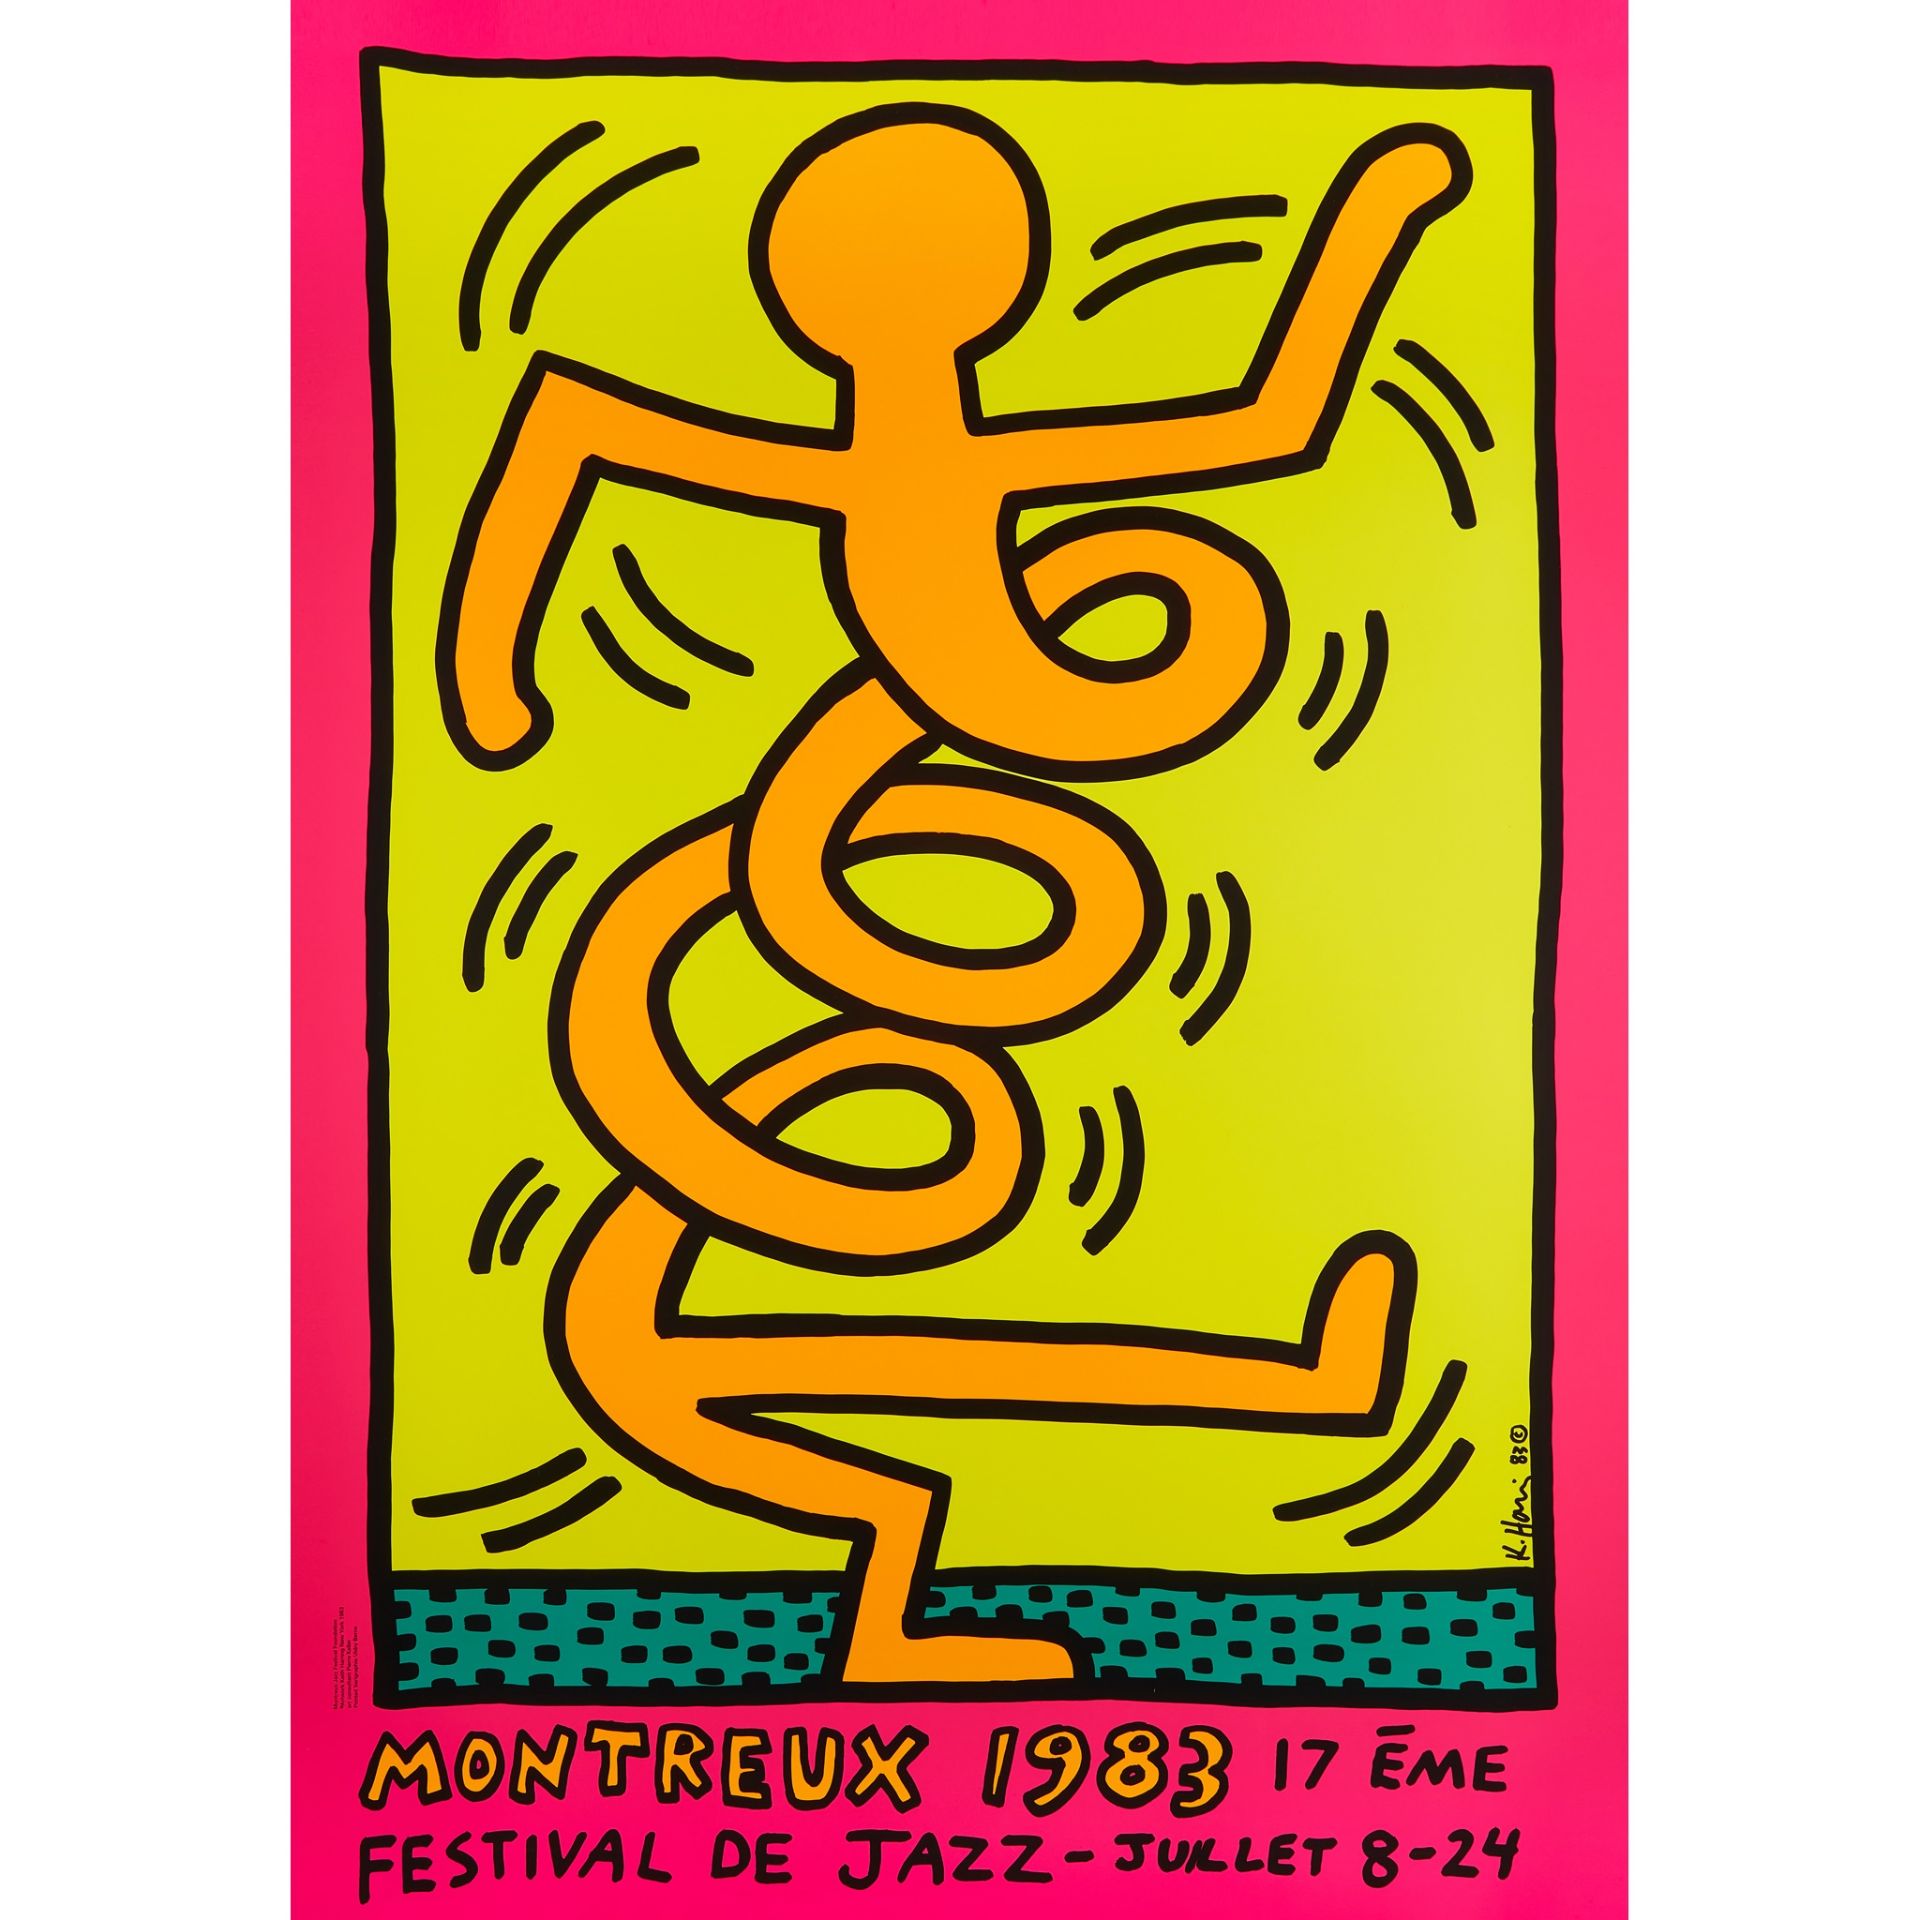 KEITH HARING (AMERICAN 1958-1990) MONTREUX JAZZ POSTER (PINK) - 1983